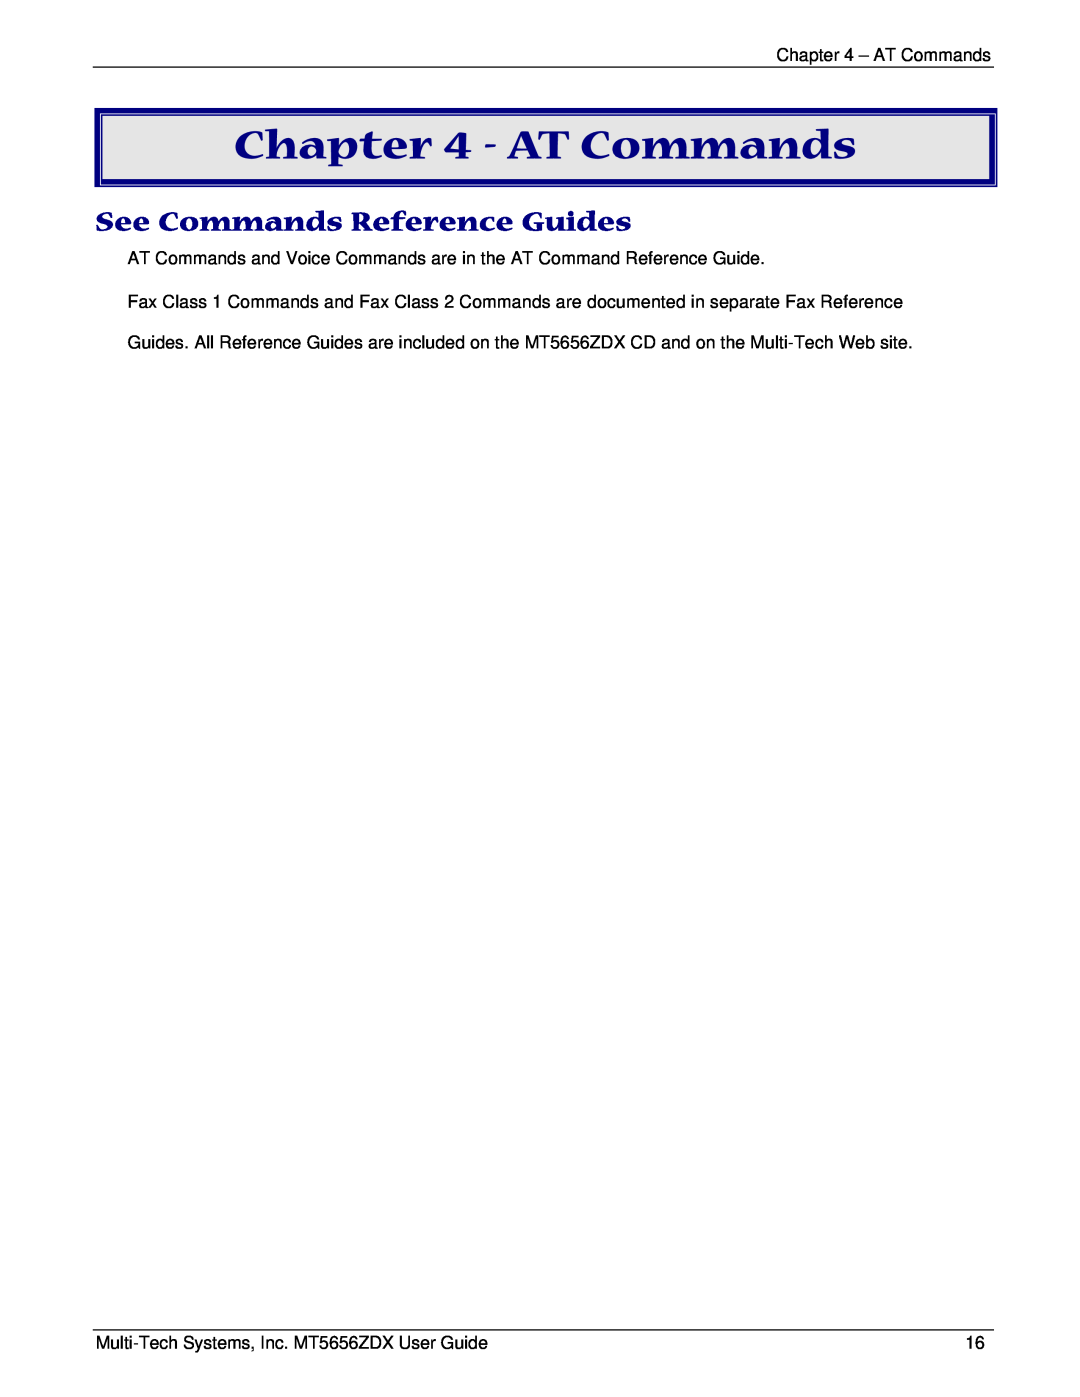 Multi Tech Equipment MT5656ZDX manual AT Commands, See Commands Reference Guides 